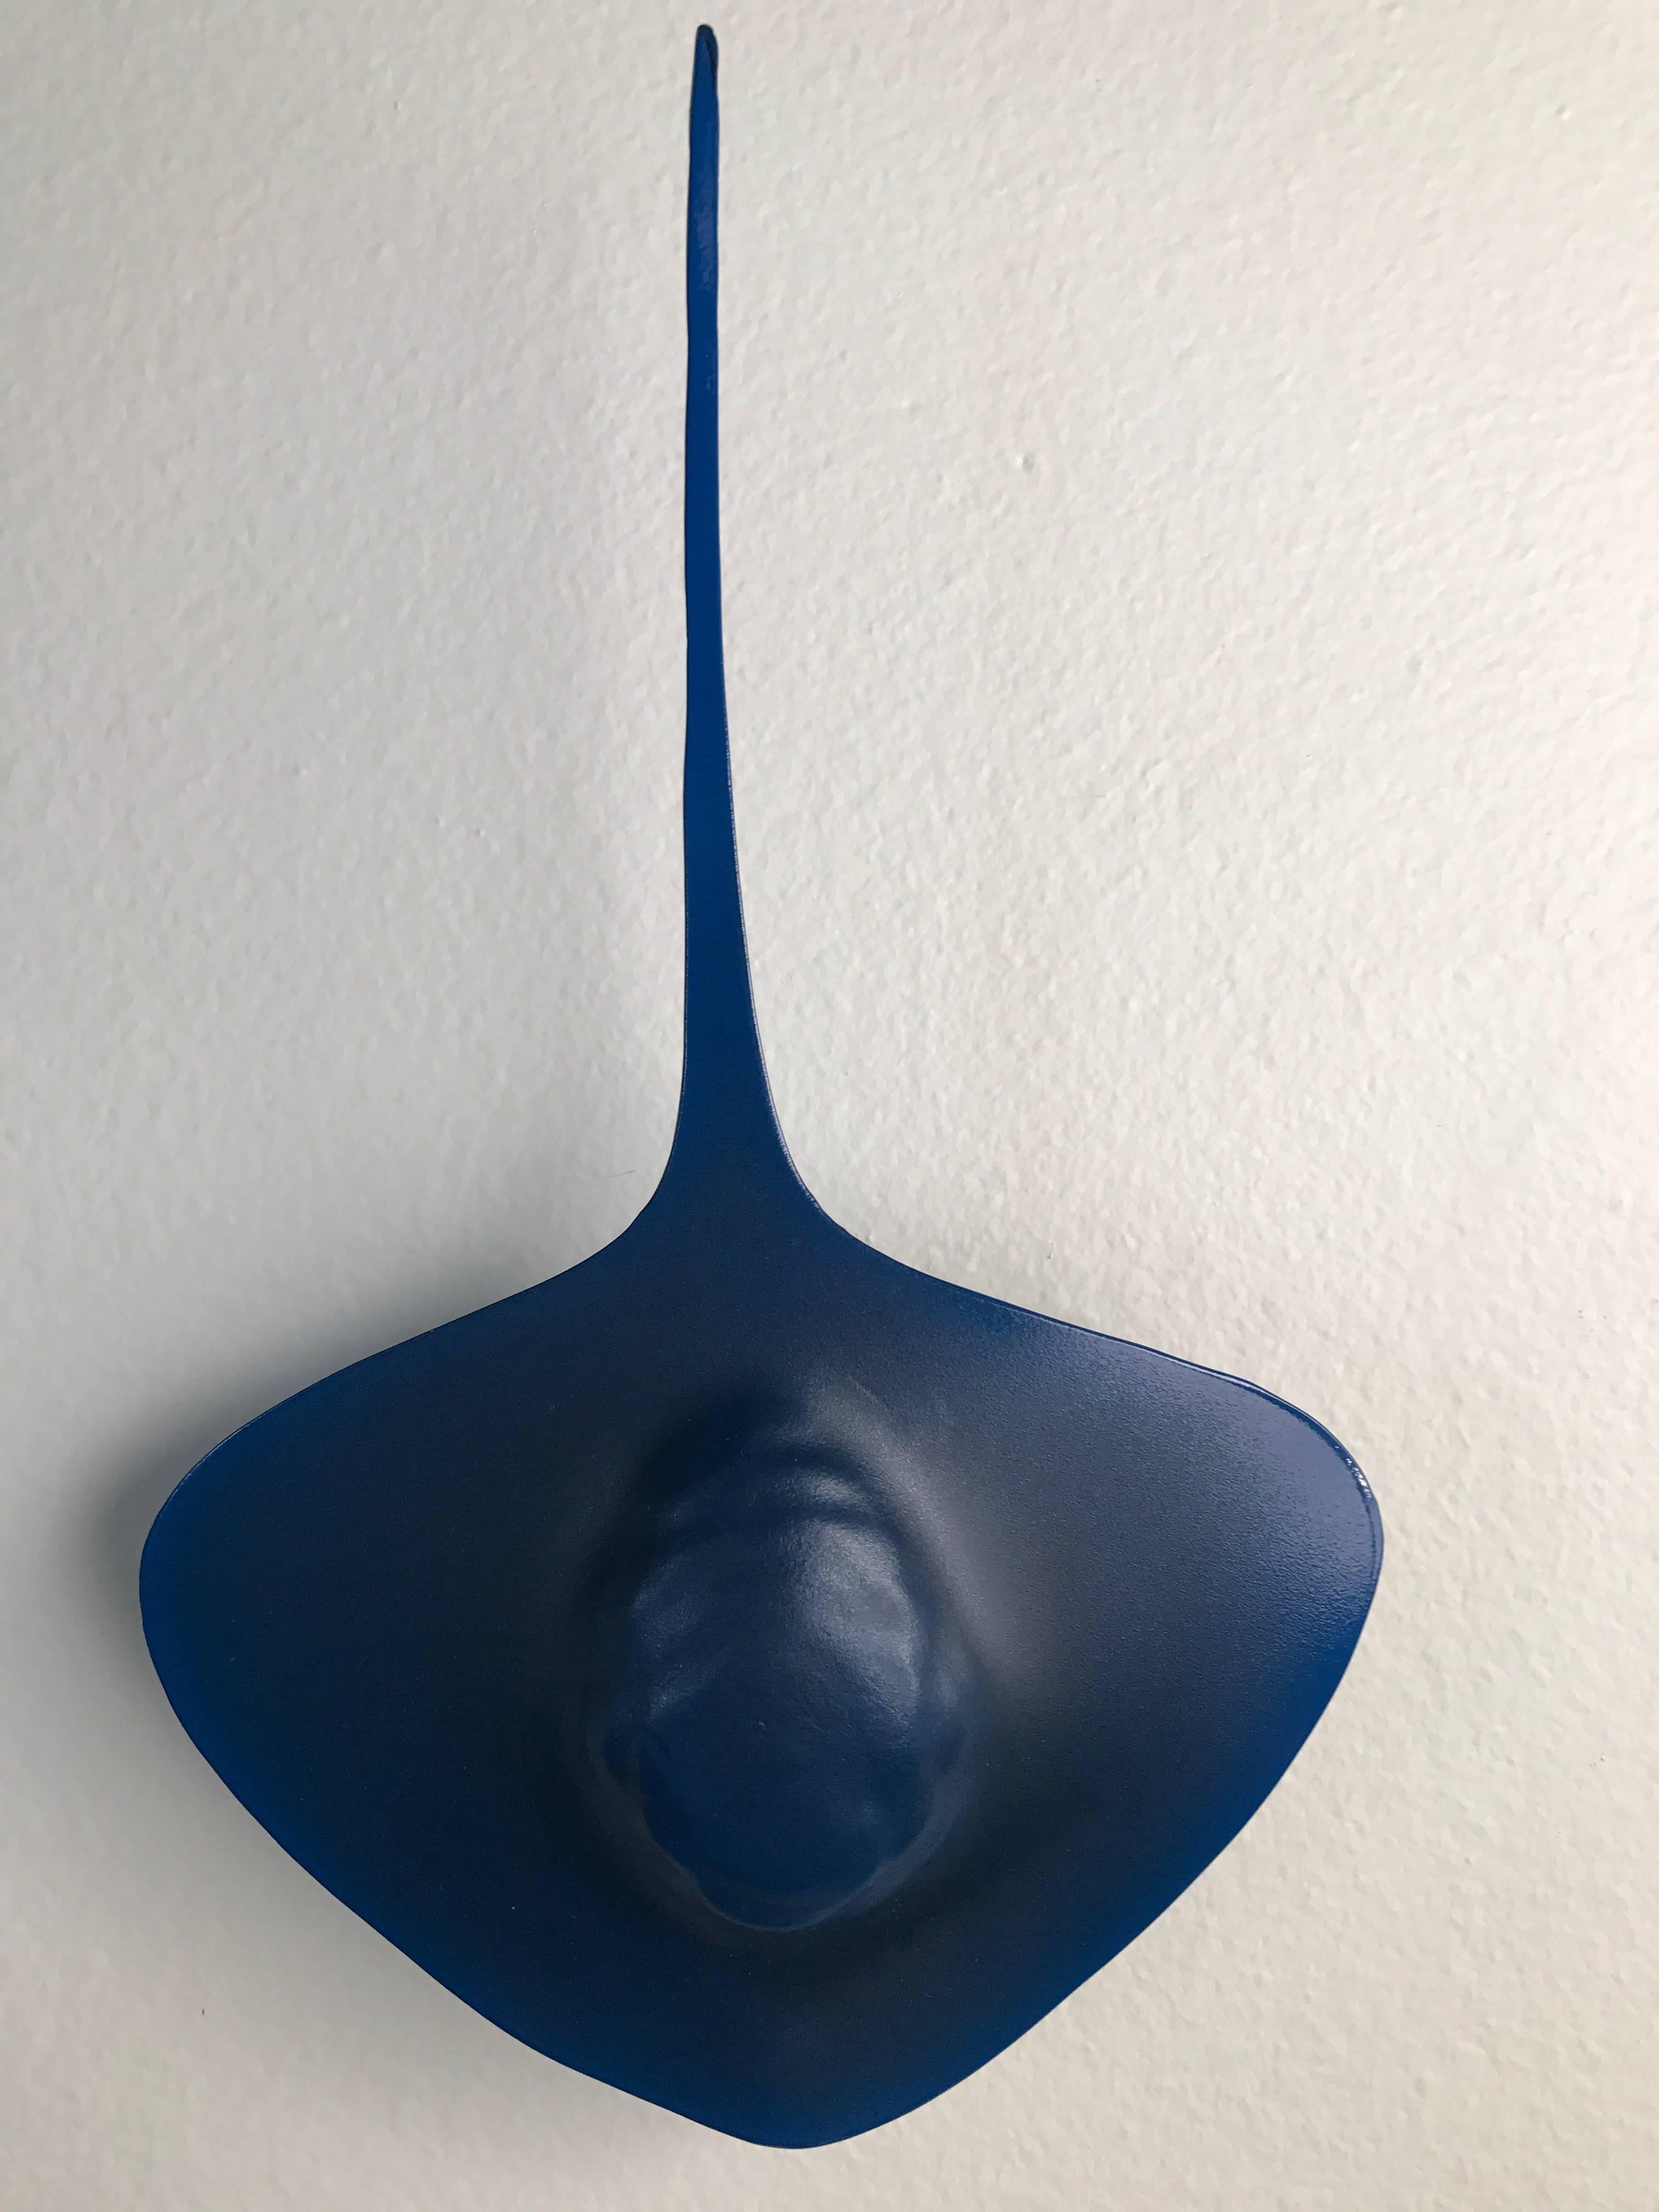 Hand forged wall sculpture by Laura Walters Abrams. Additional stingrays are available. Each sculpture is signed and powder coated.

Laura Walters Abrams has been making sculpture since the early 1990’s. Her success is due to her ability to not only